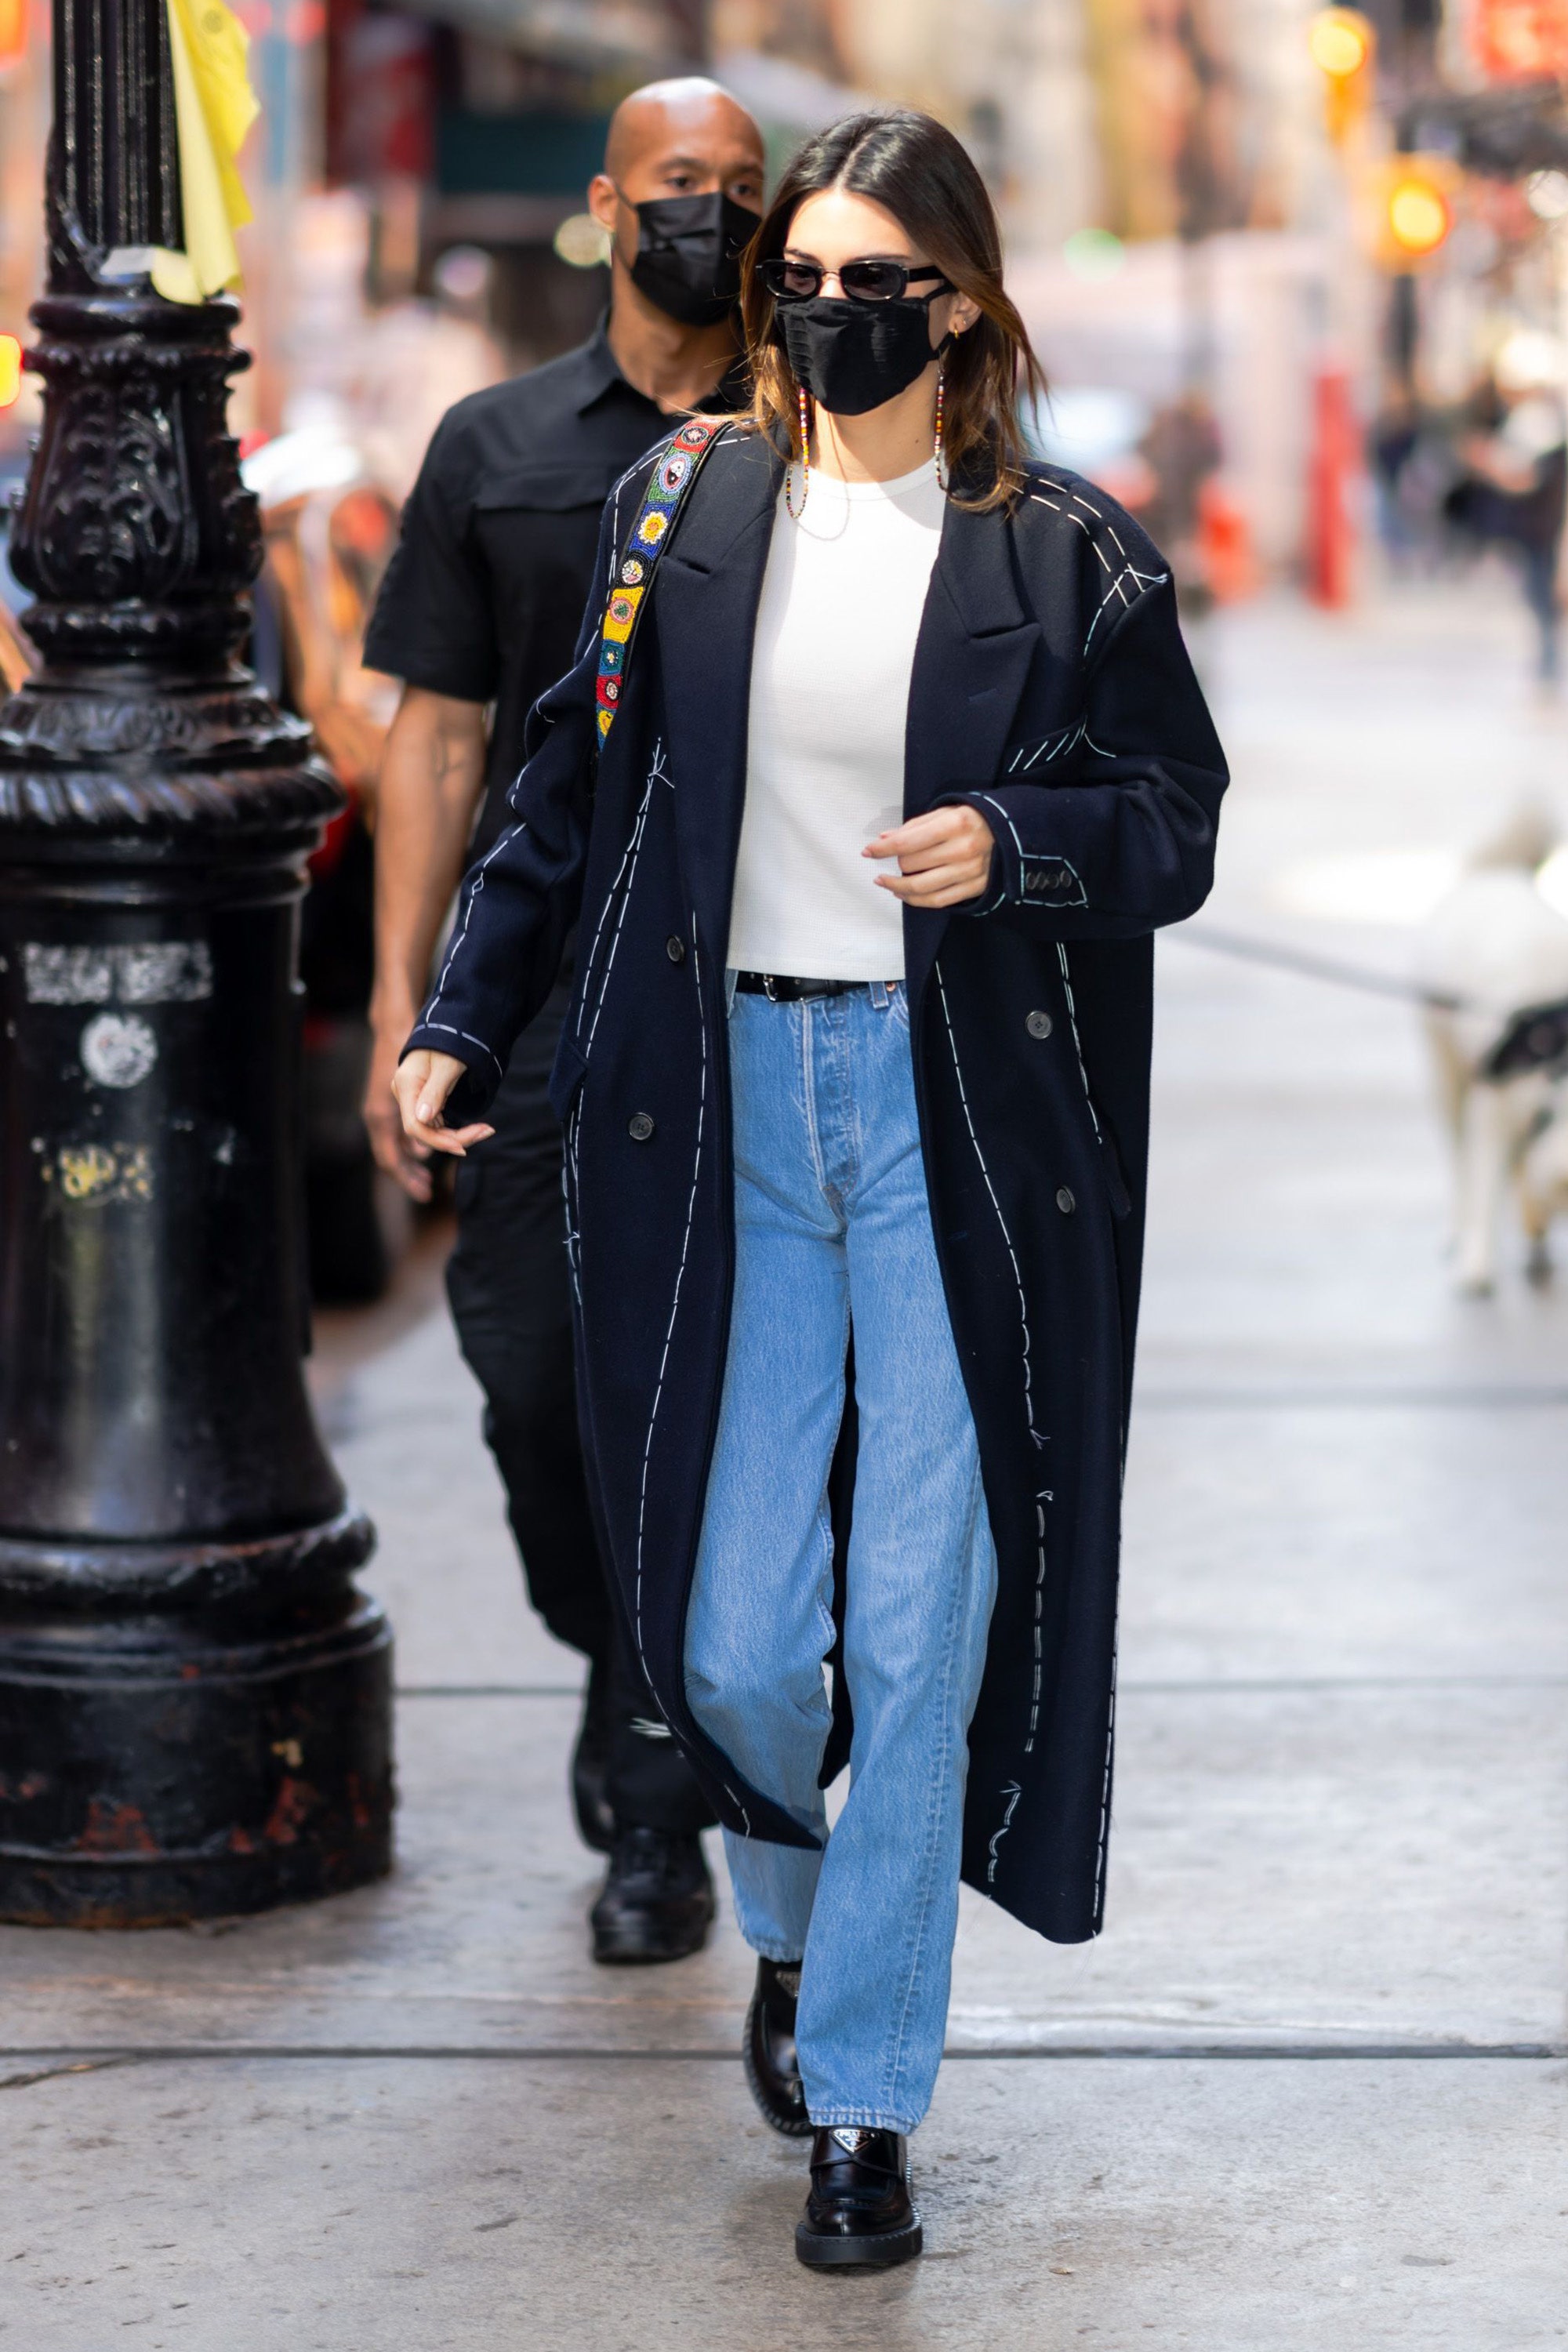 NEW YORK NEW YORK  MARCH 22 Kendall Jenner is seen in SoHo on March 22 2021 in New York City.